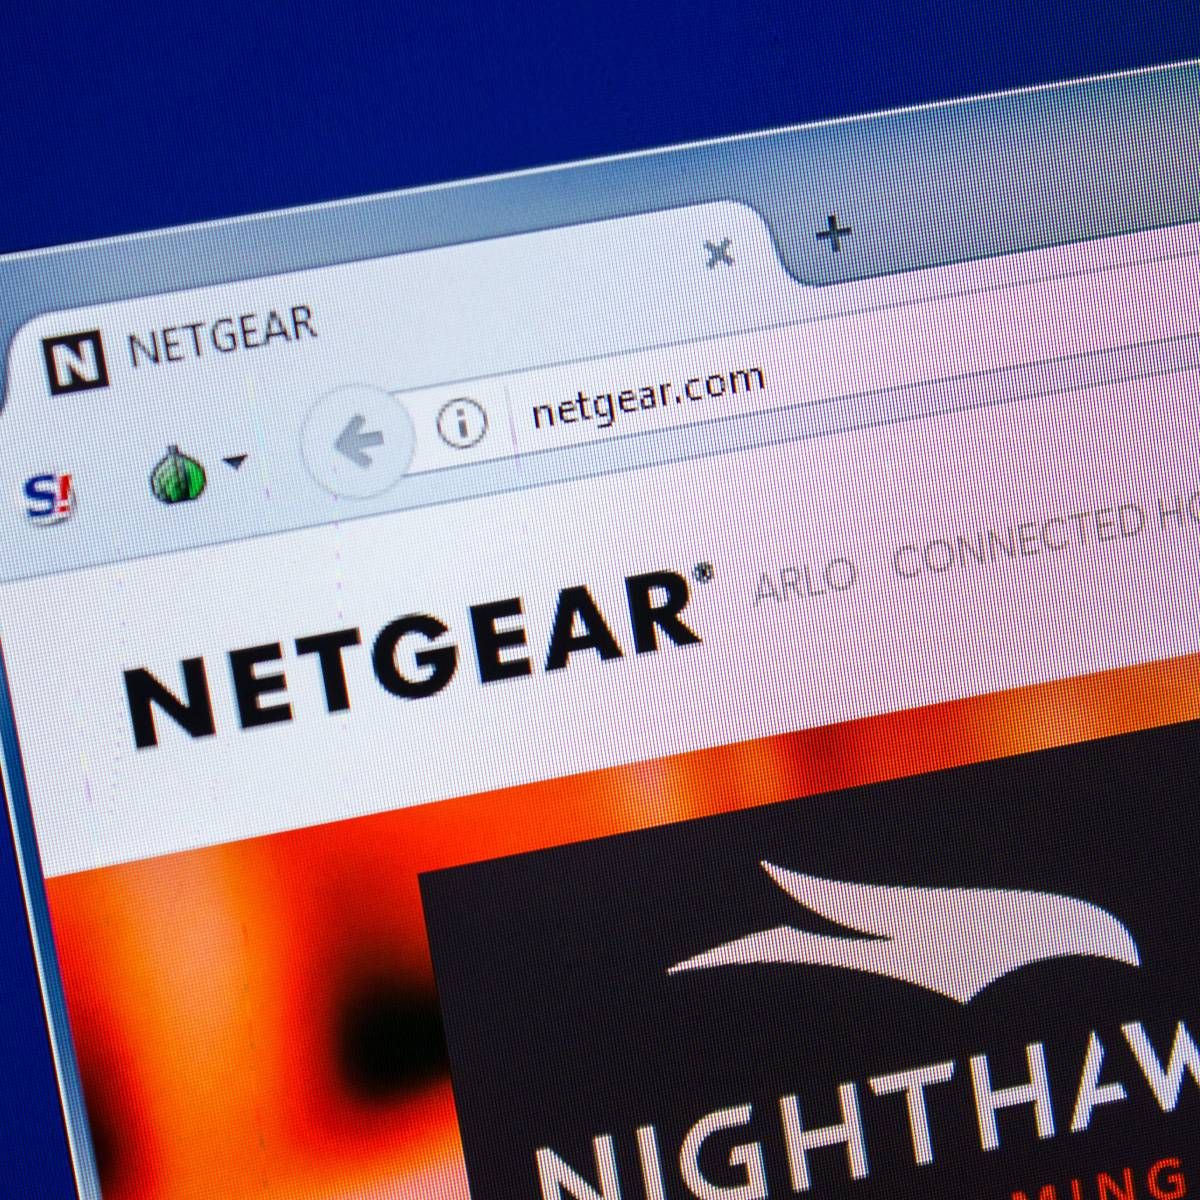 Homepage of NETGEAR website on the display of a PC.